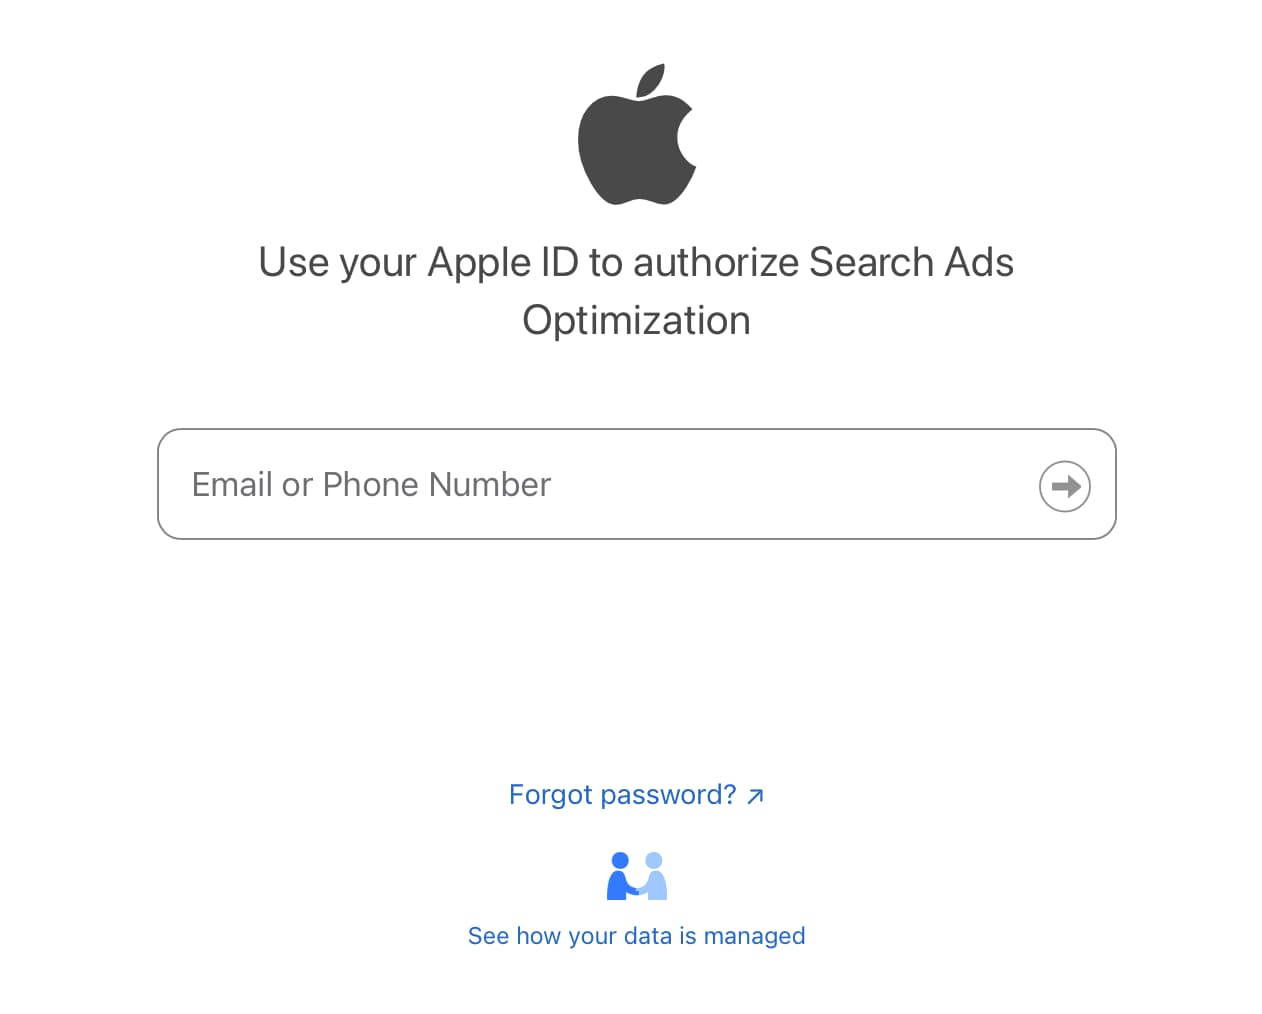 Use your Apple ID to authorize